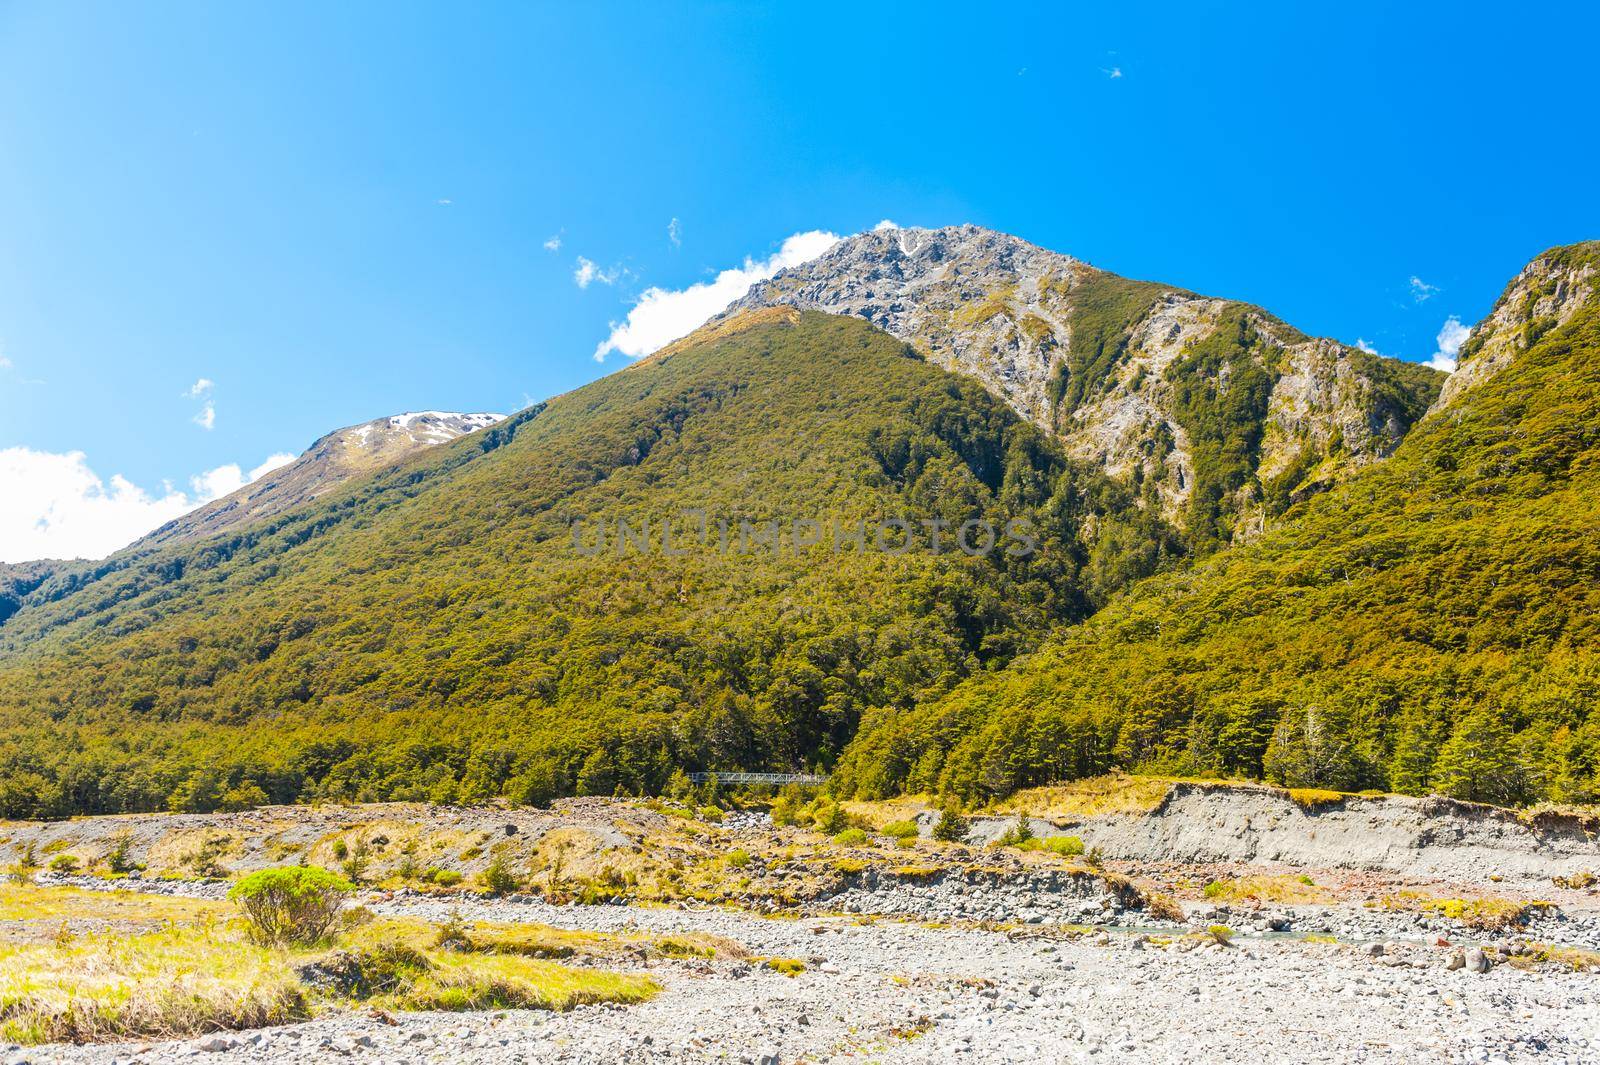 Bealey River could be found in the Arthur's Pass National Park, New Zealand